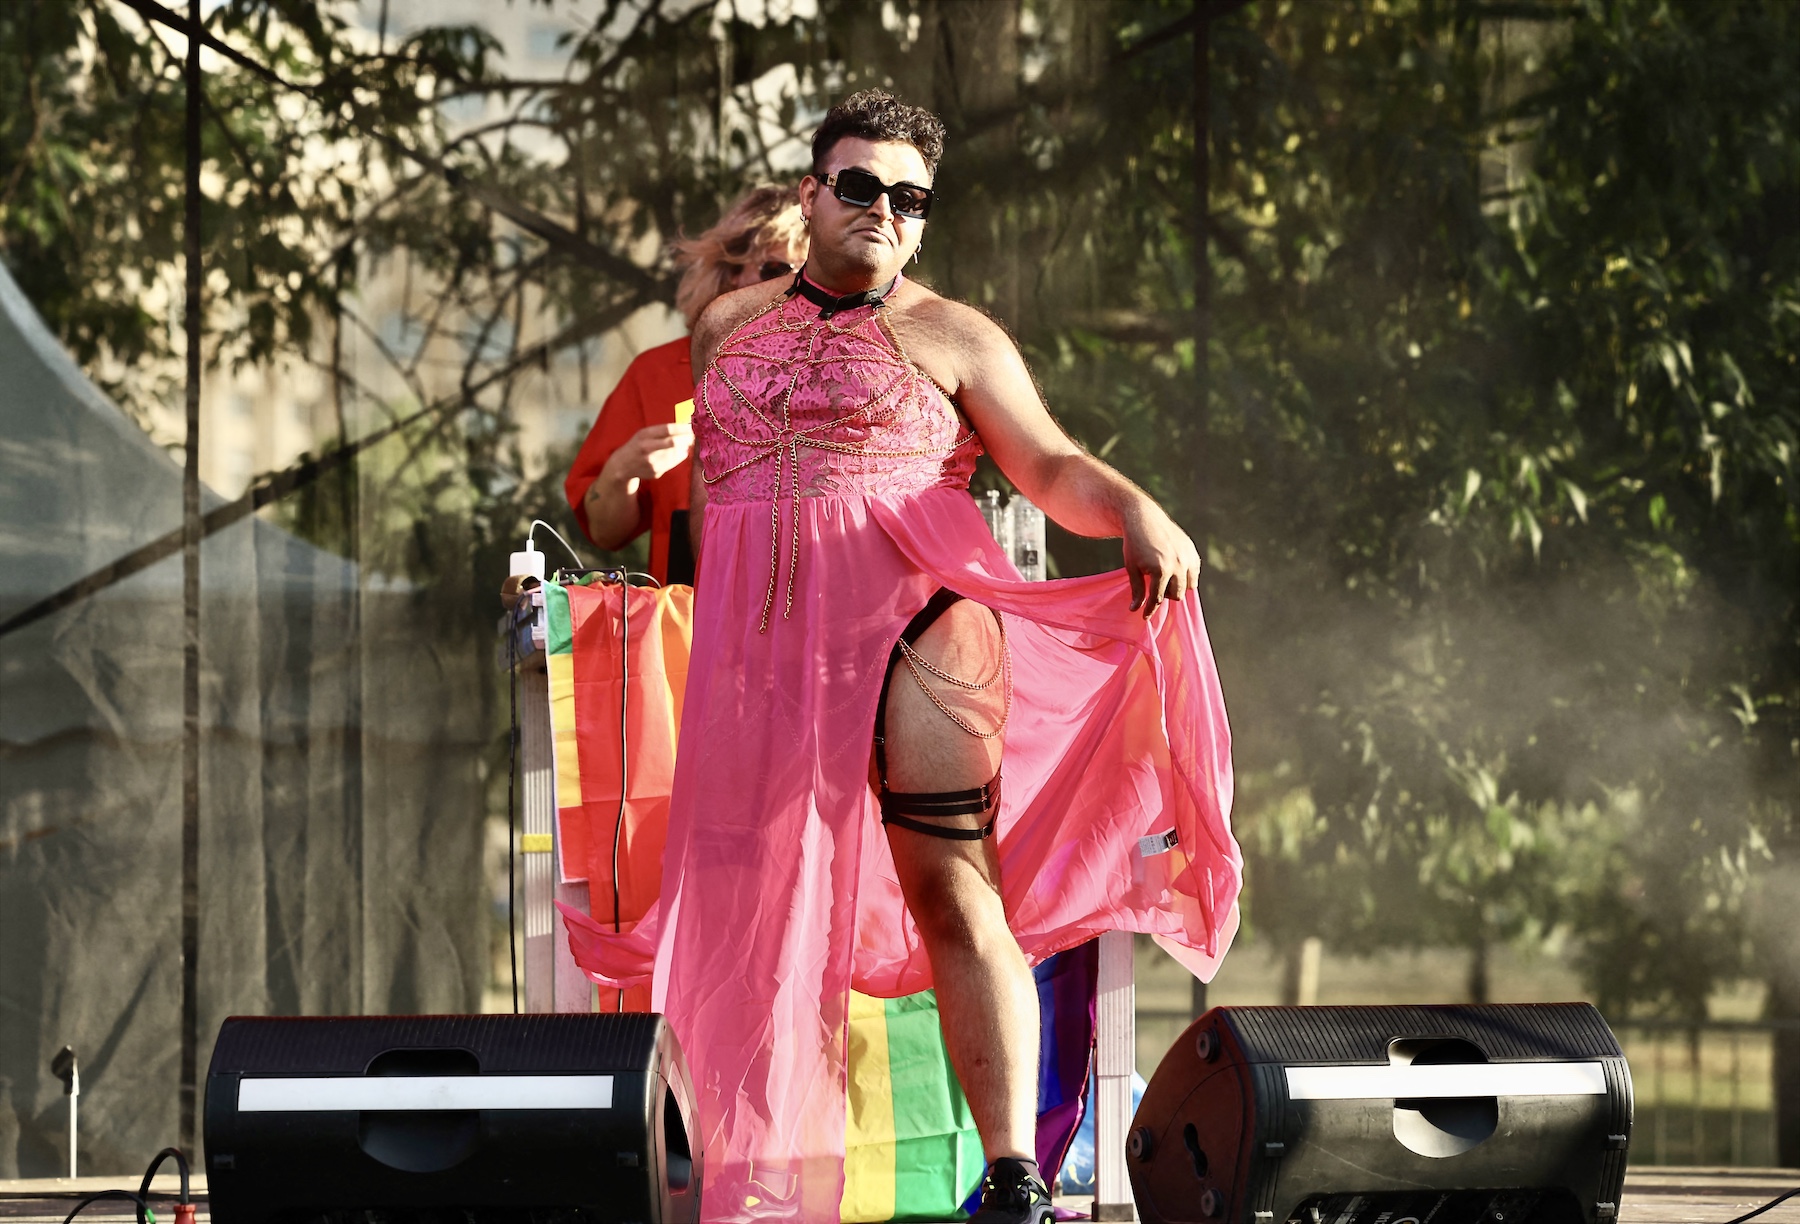 A man wears a pink dress and appears to stand on a stage during Romania's Pride march